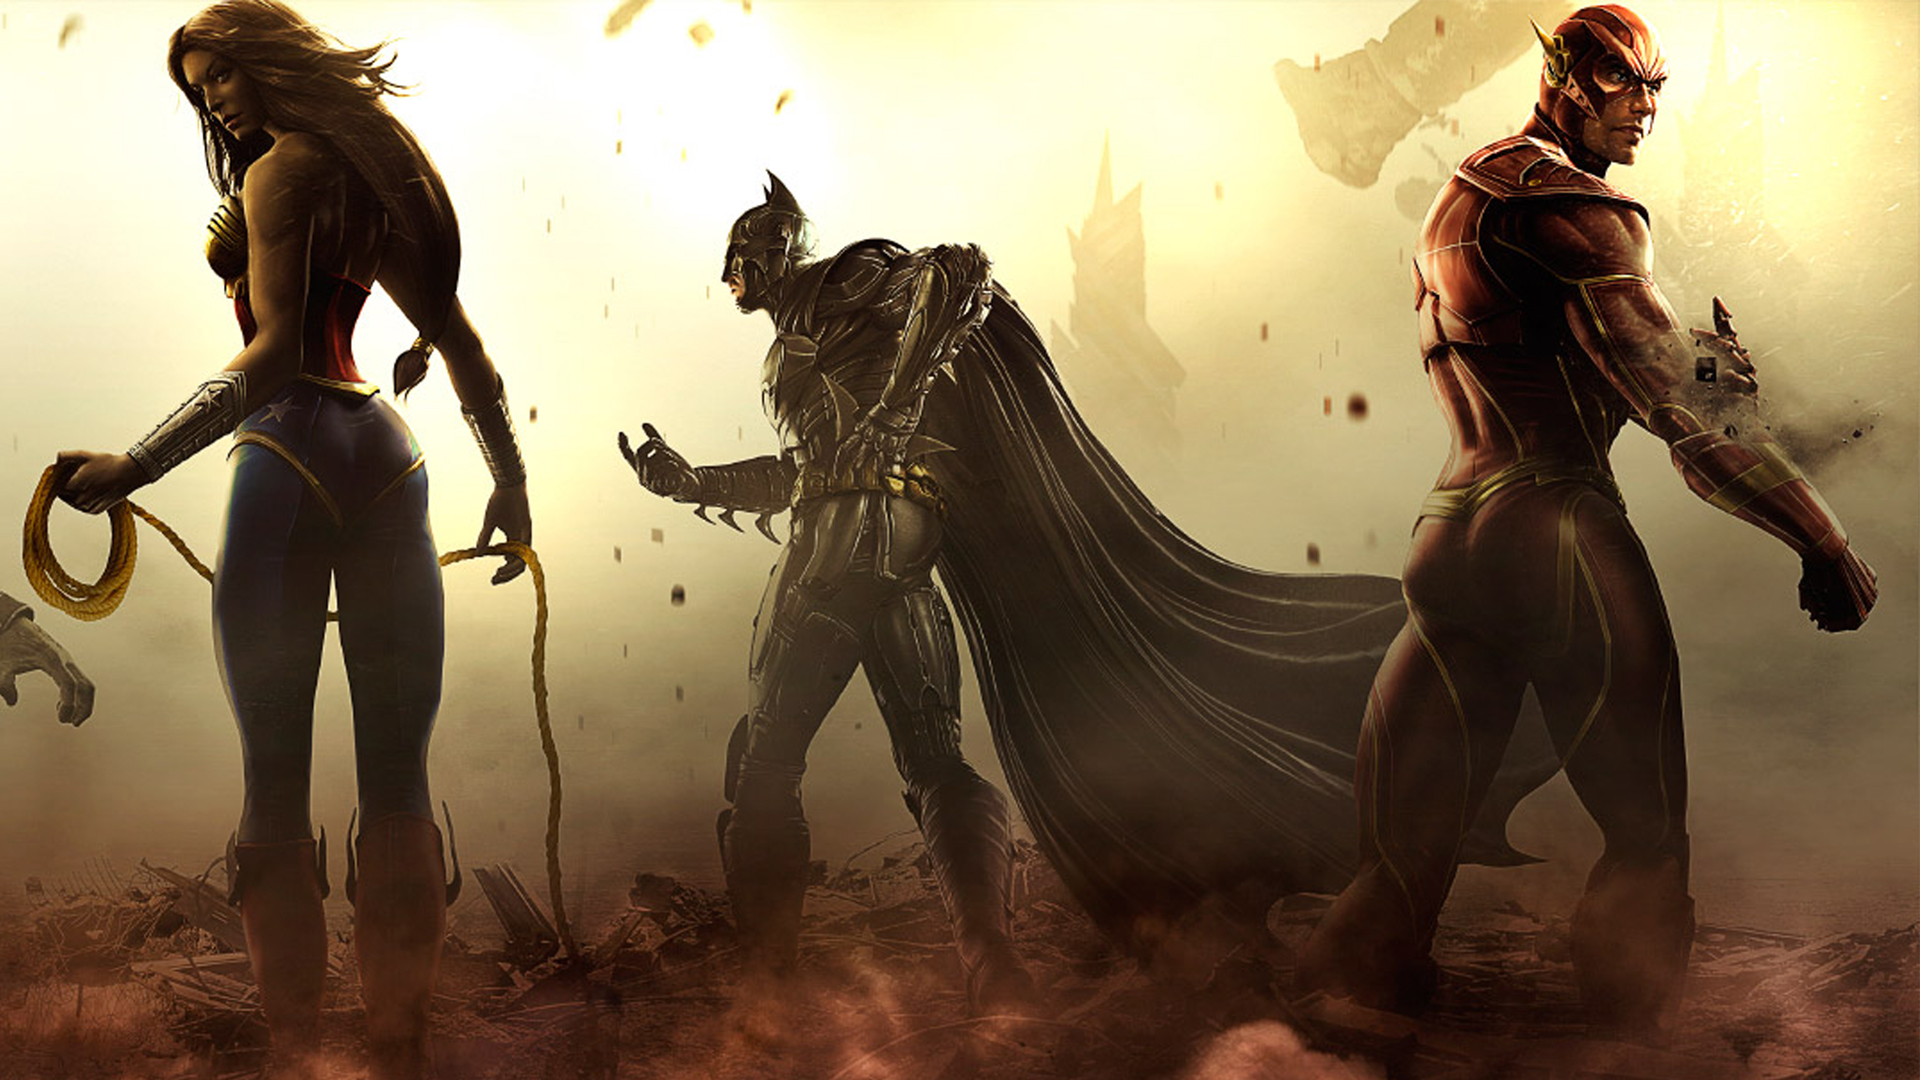  Gods Among Us You are downloading Injustice Gods Among Us wallpaper